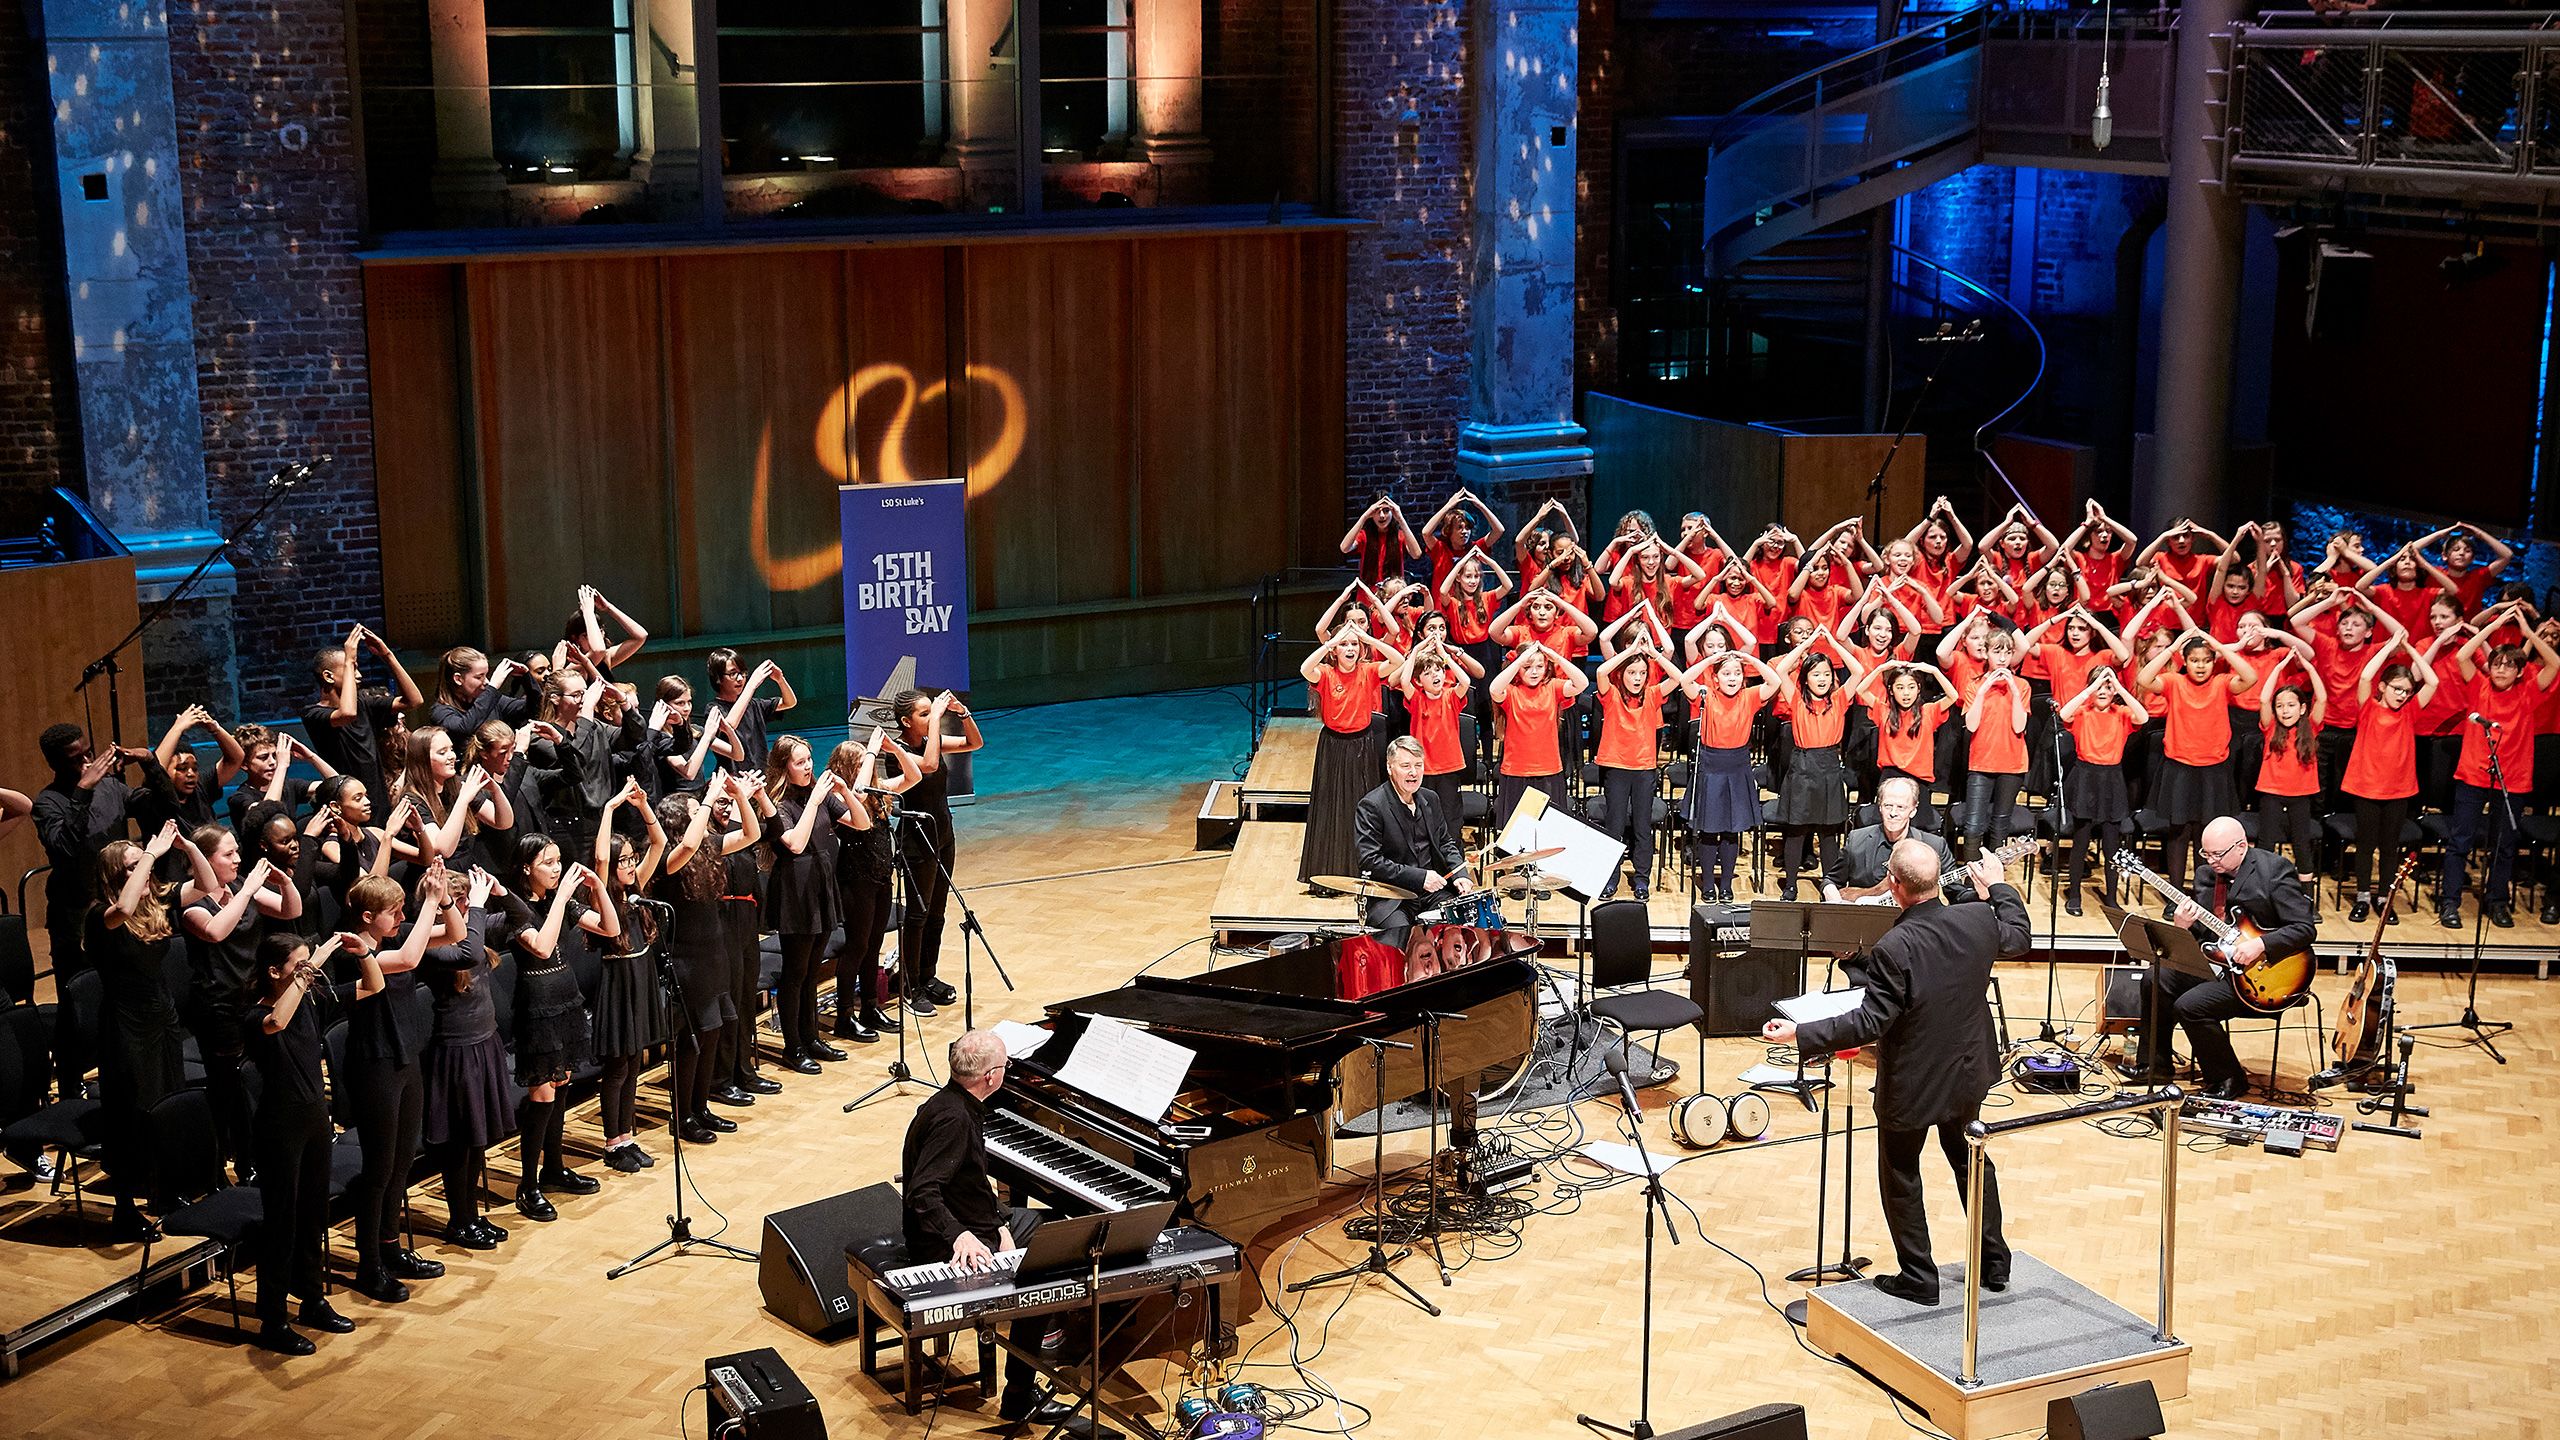 Choirs on stage performing with a small band